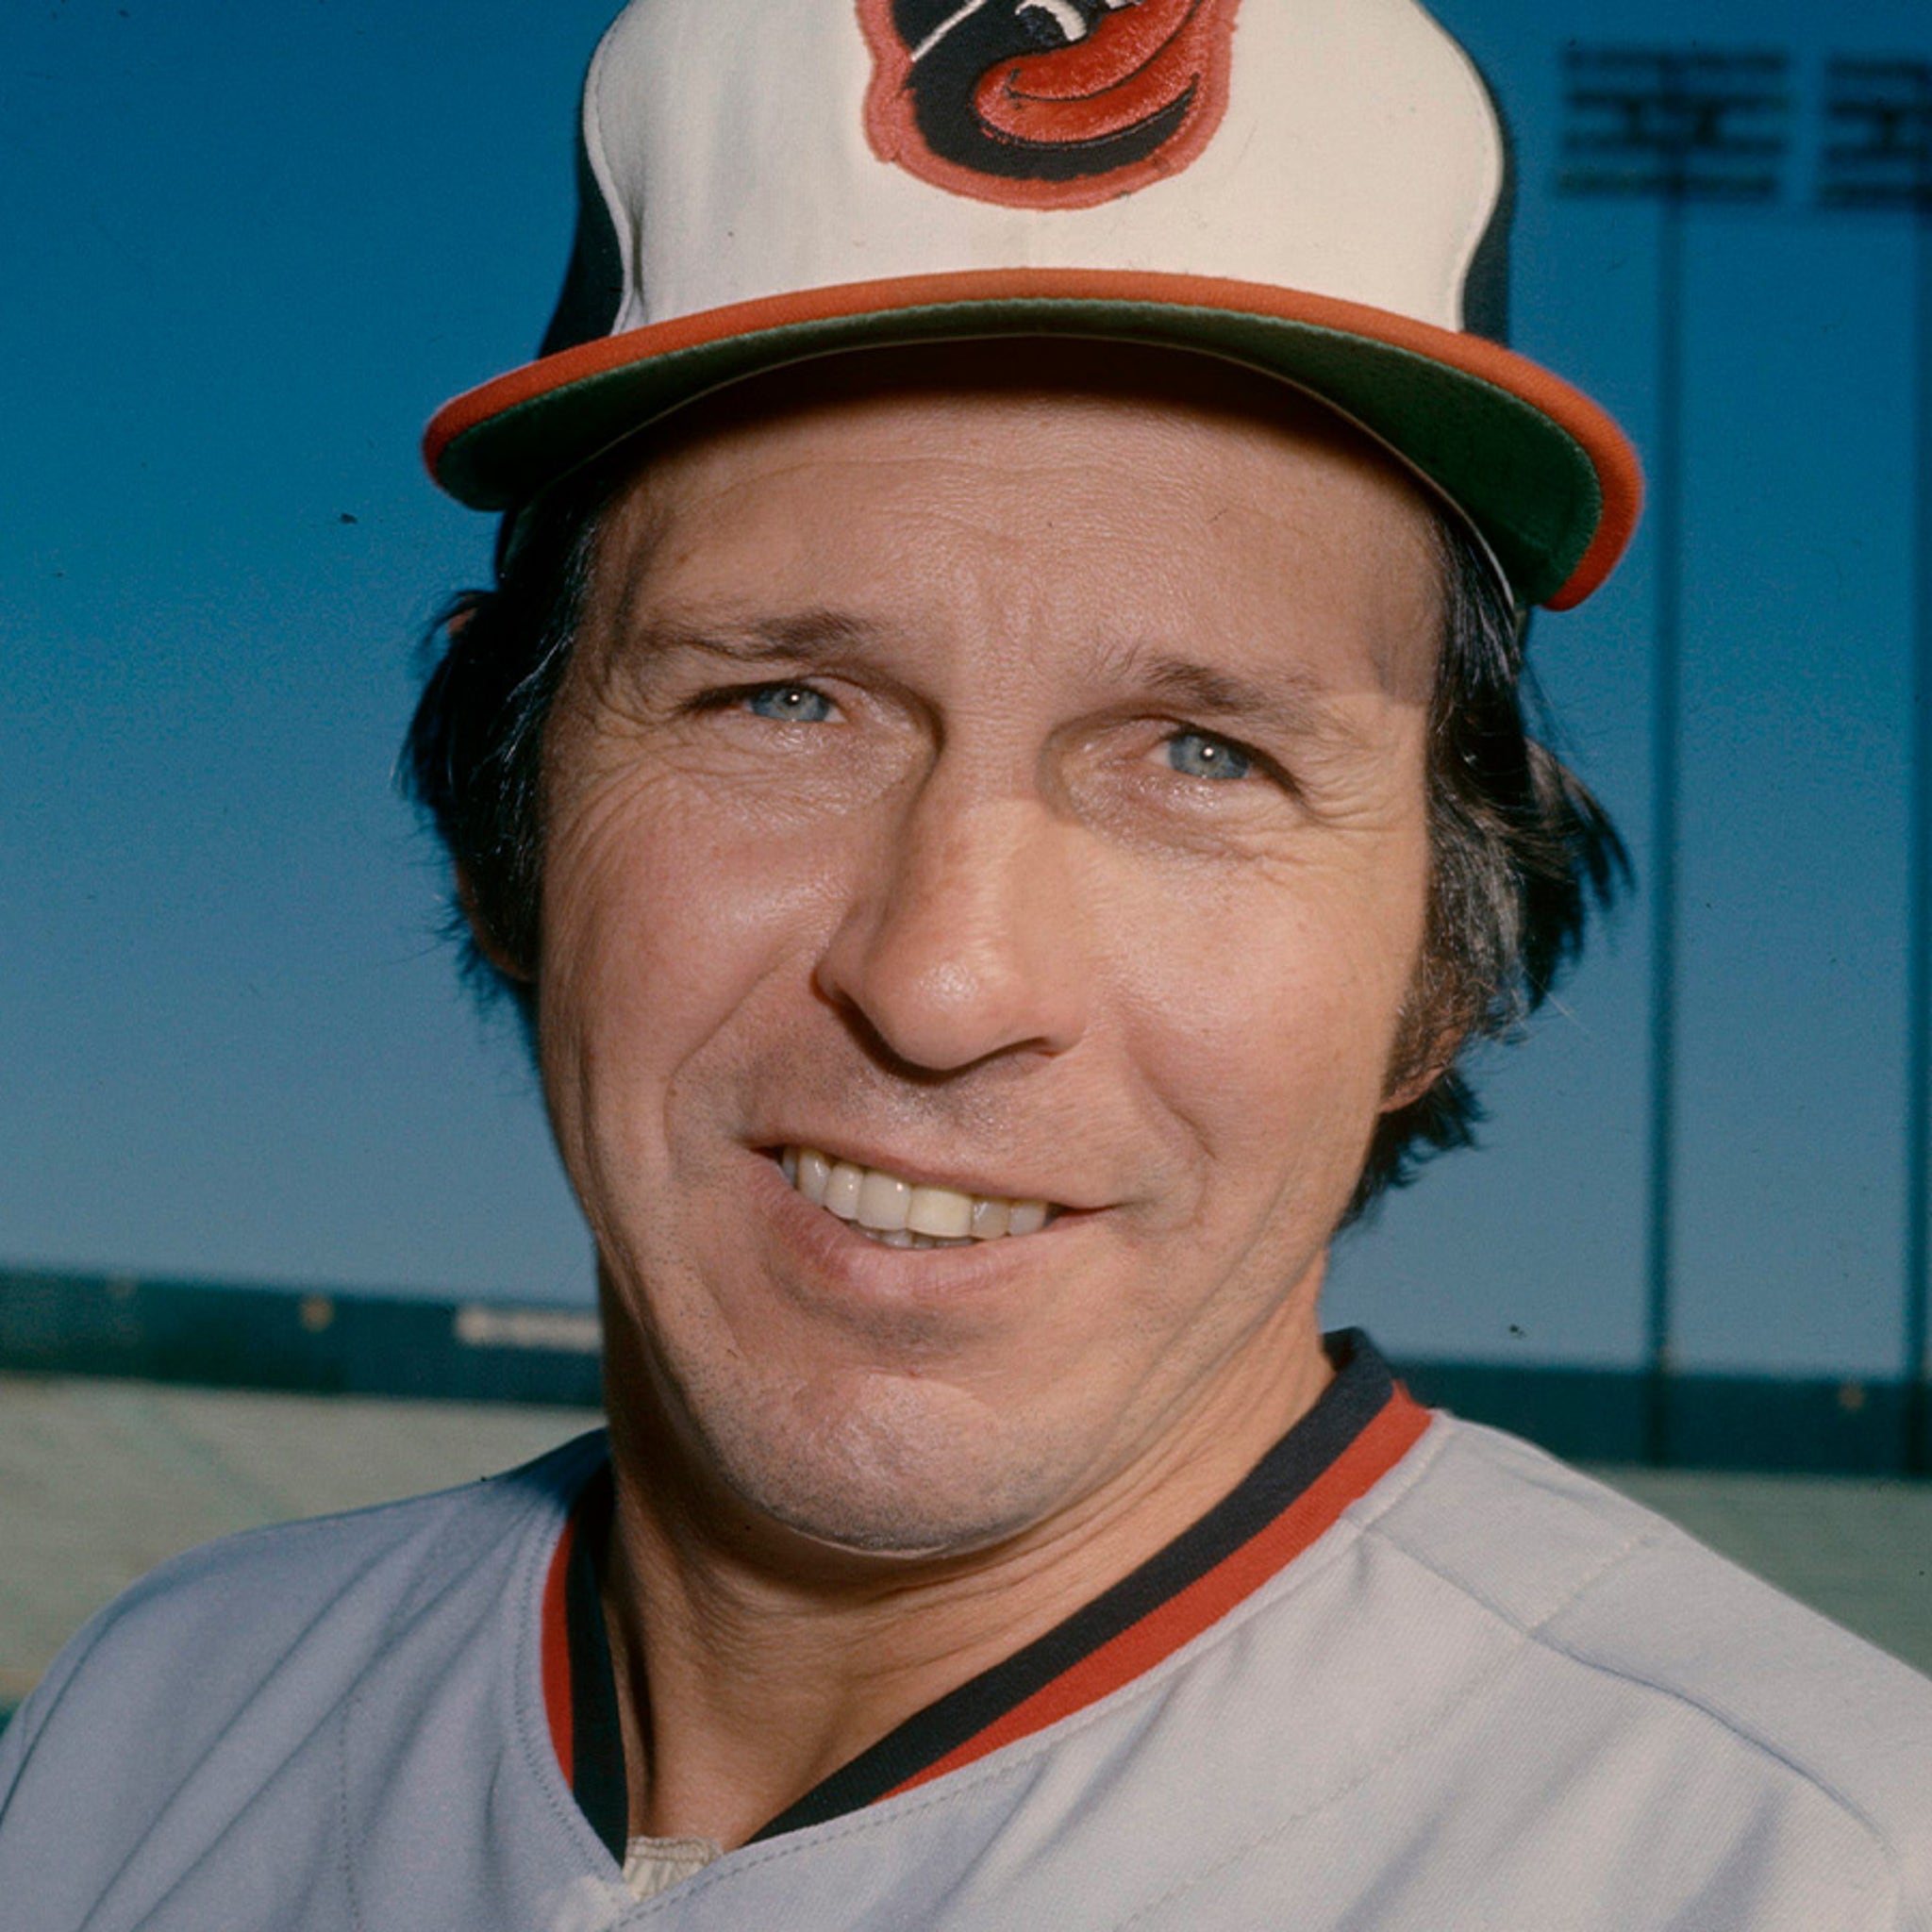 Remembering the greatness of Brooks Robinson in the 1970 World Series.